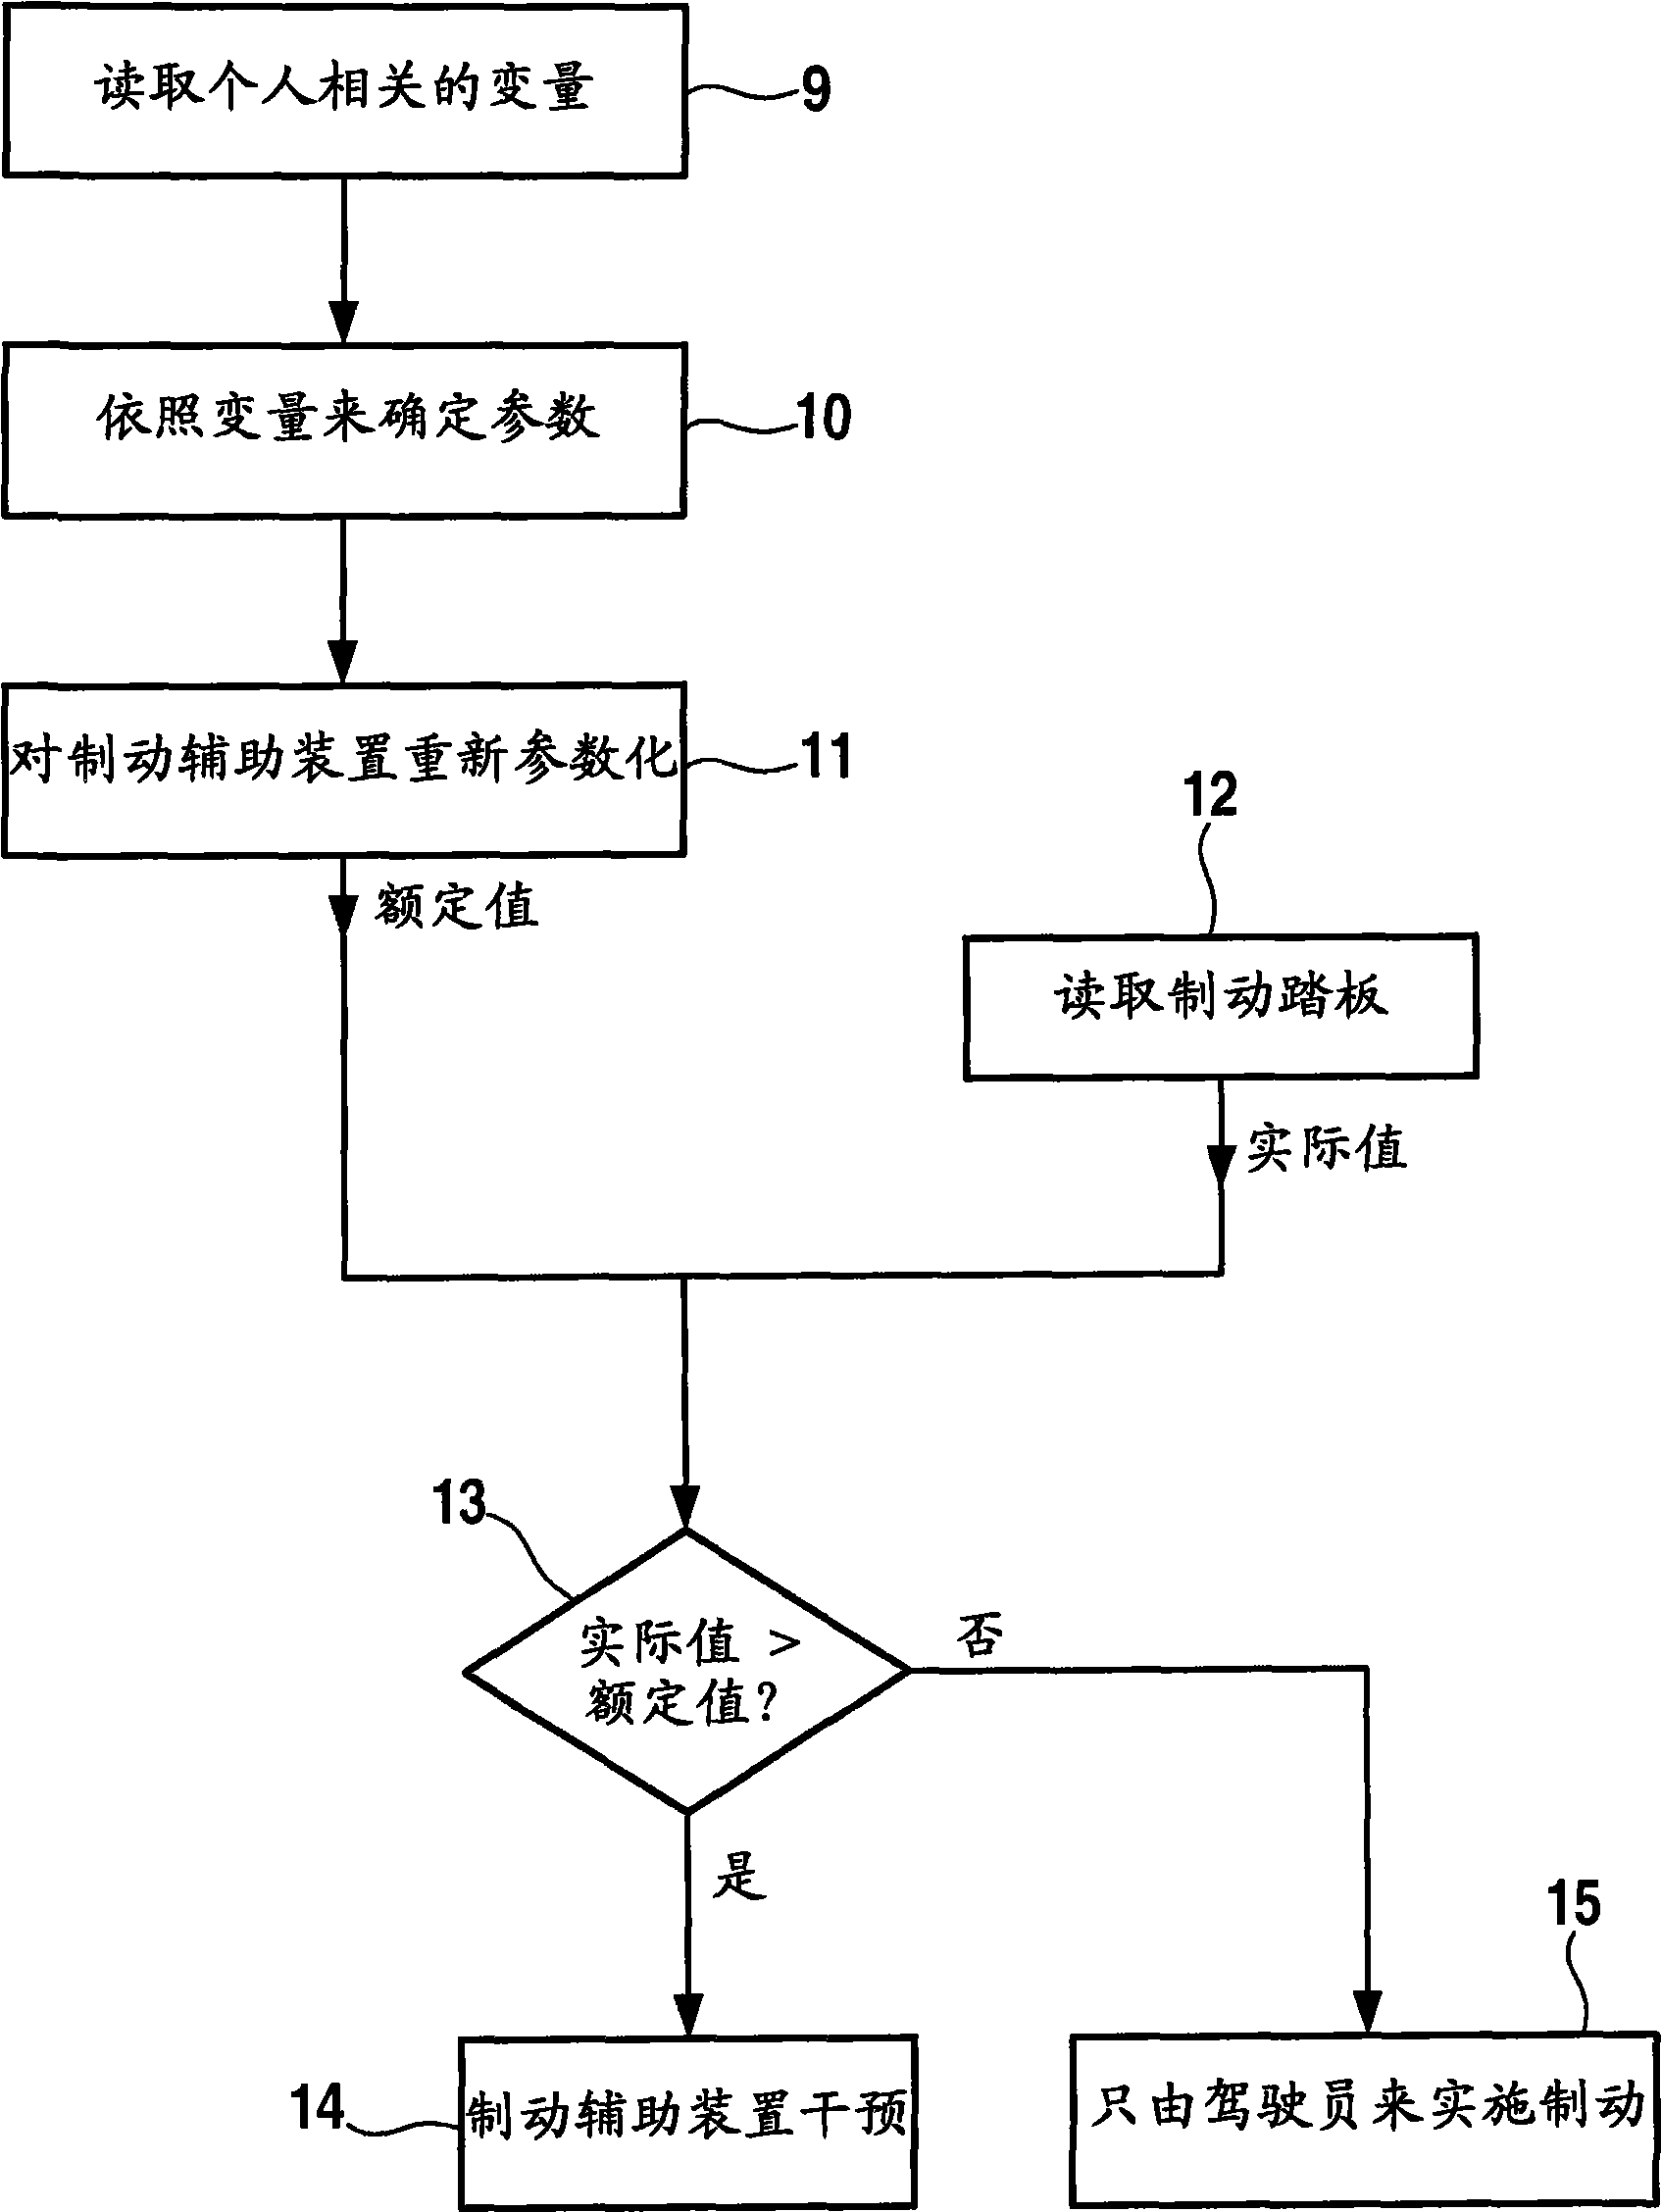 Method for setting characteristic variables of a brake system in a motor vehicle